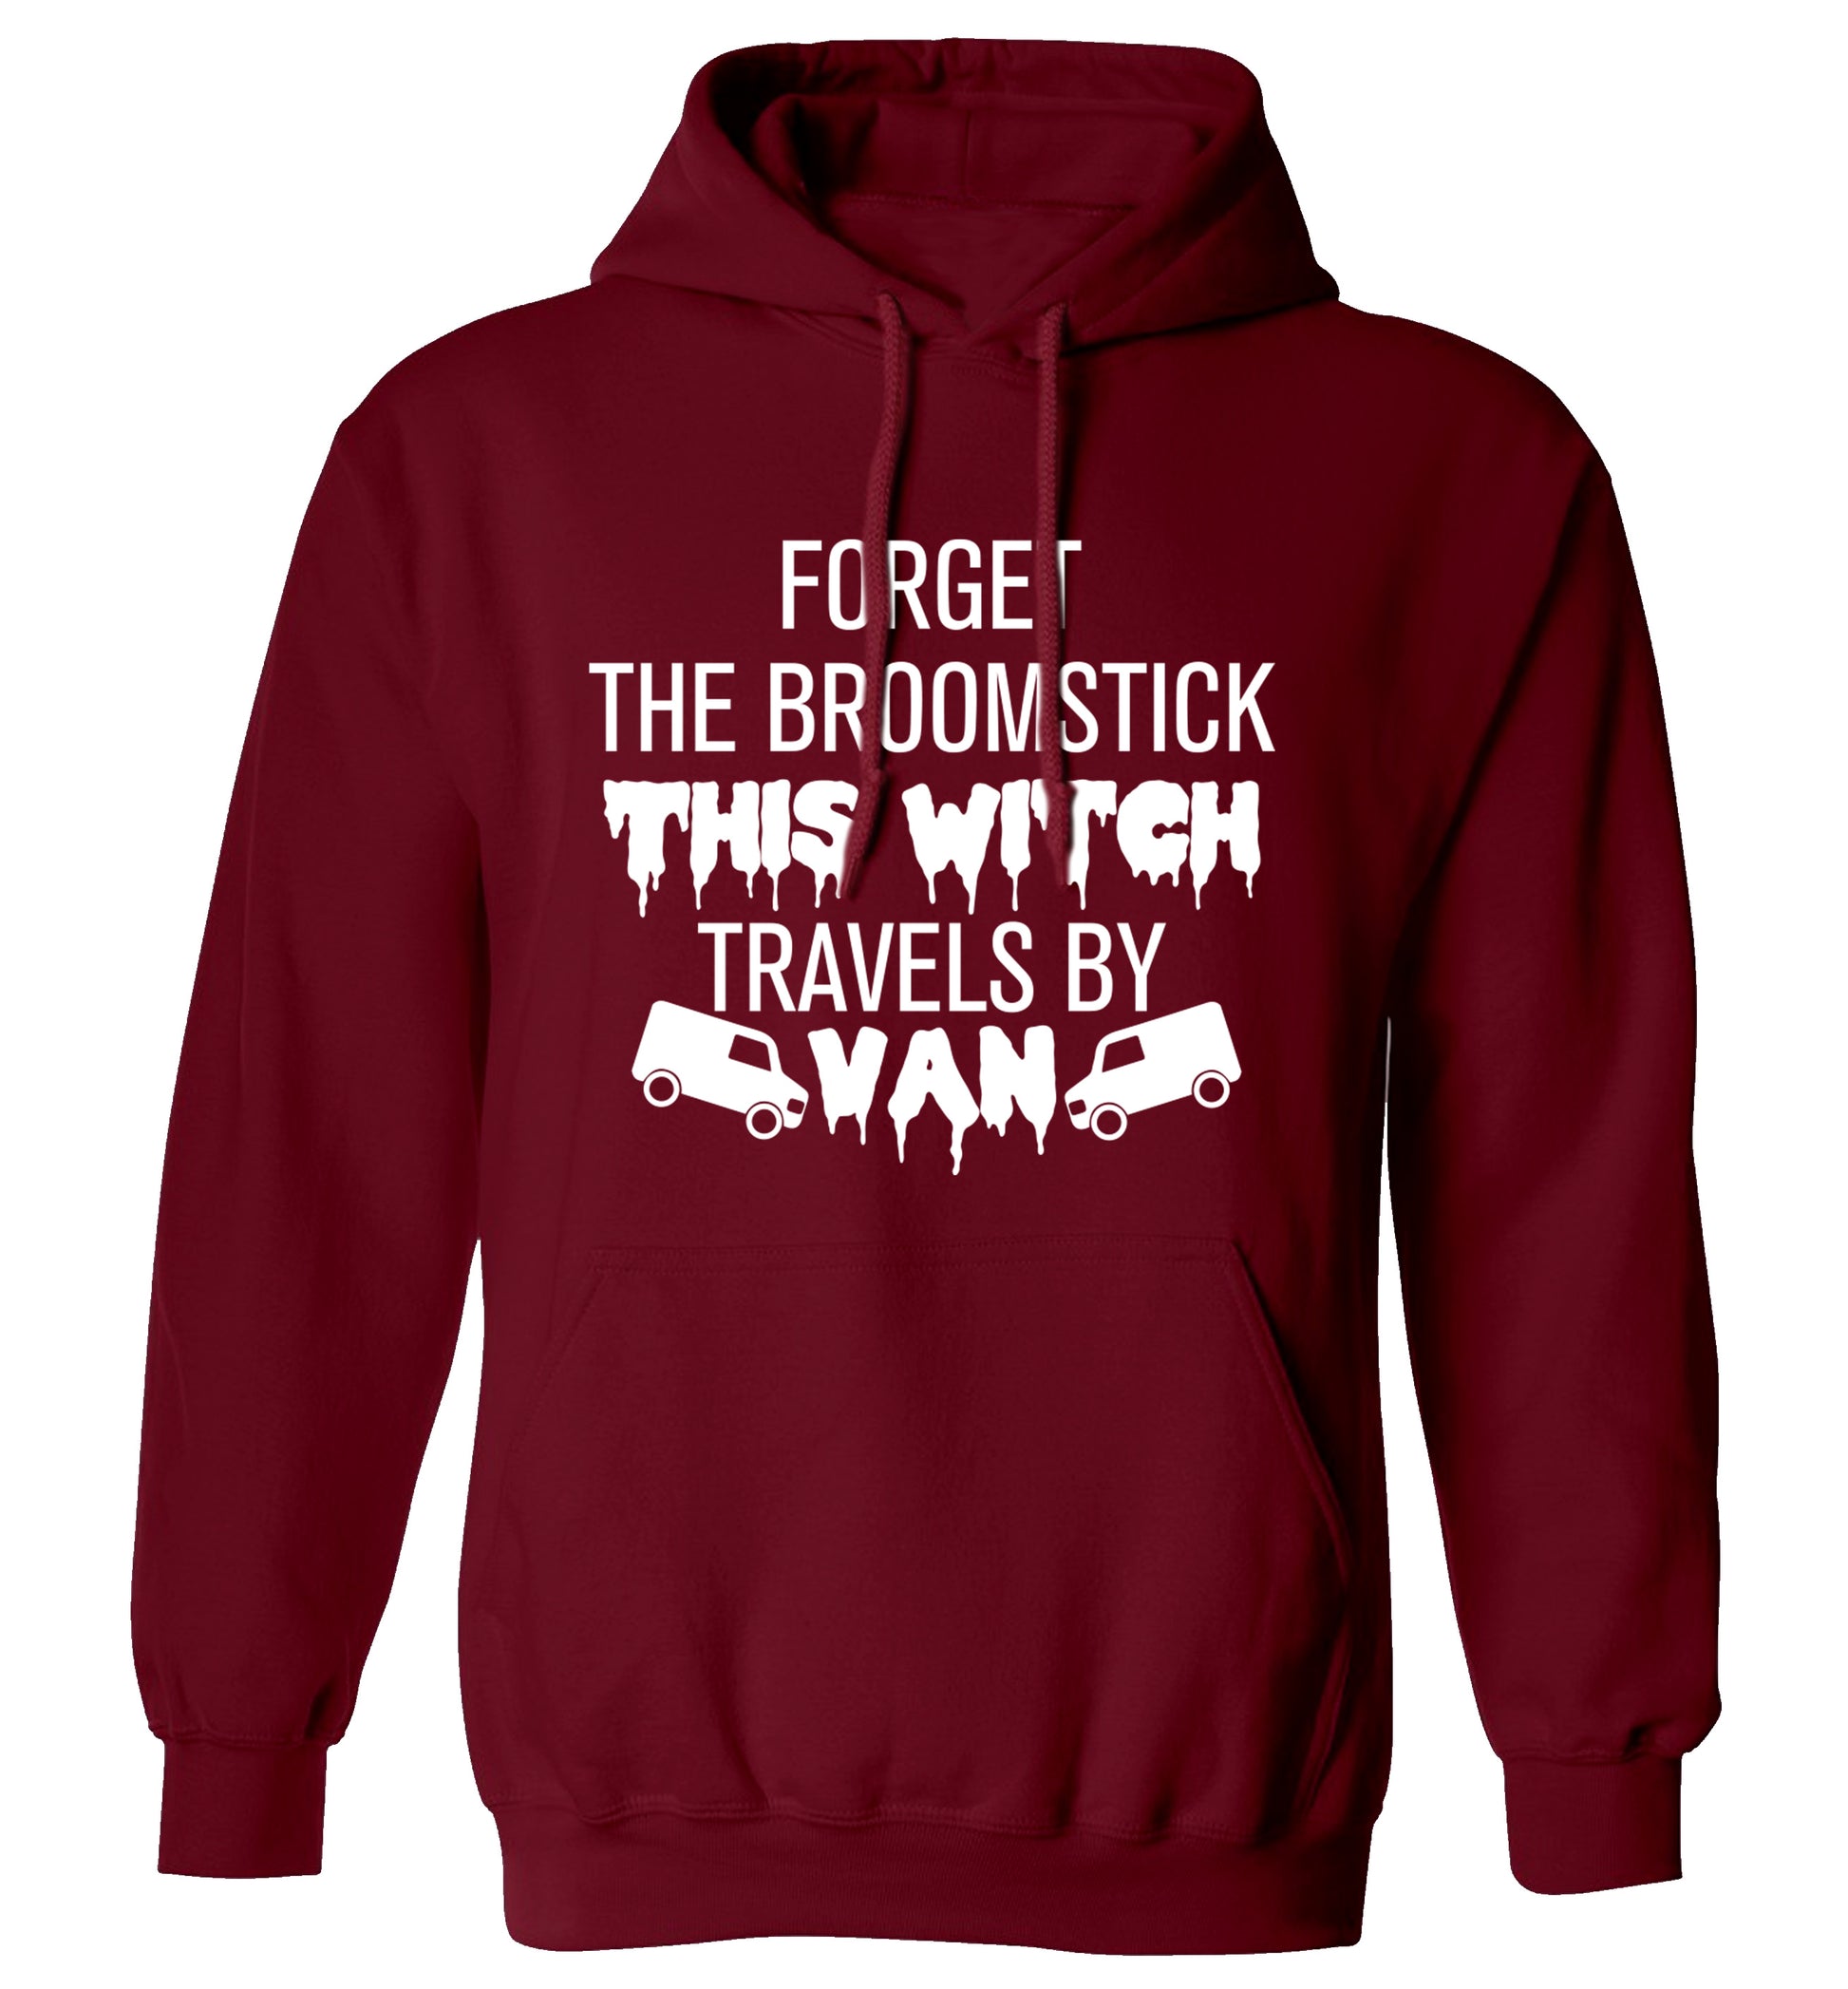 Forget the broomstick this witch travels by van adults unisexmaroon hoodie 2XL